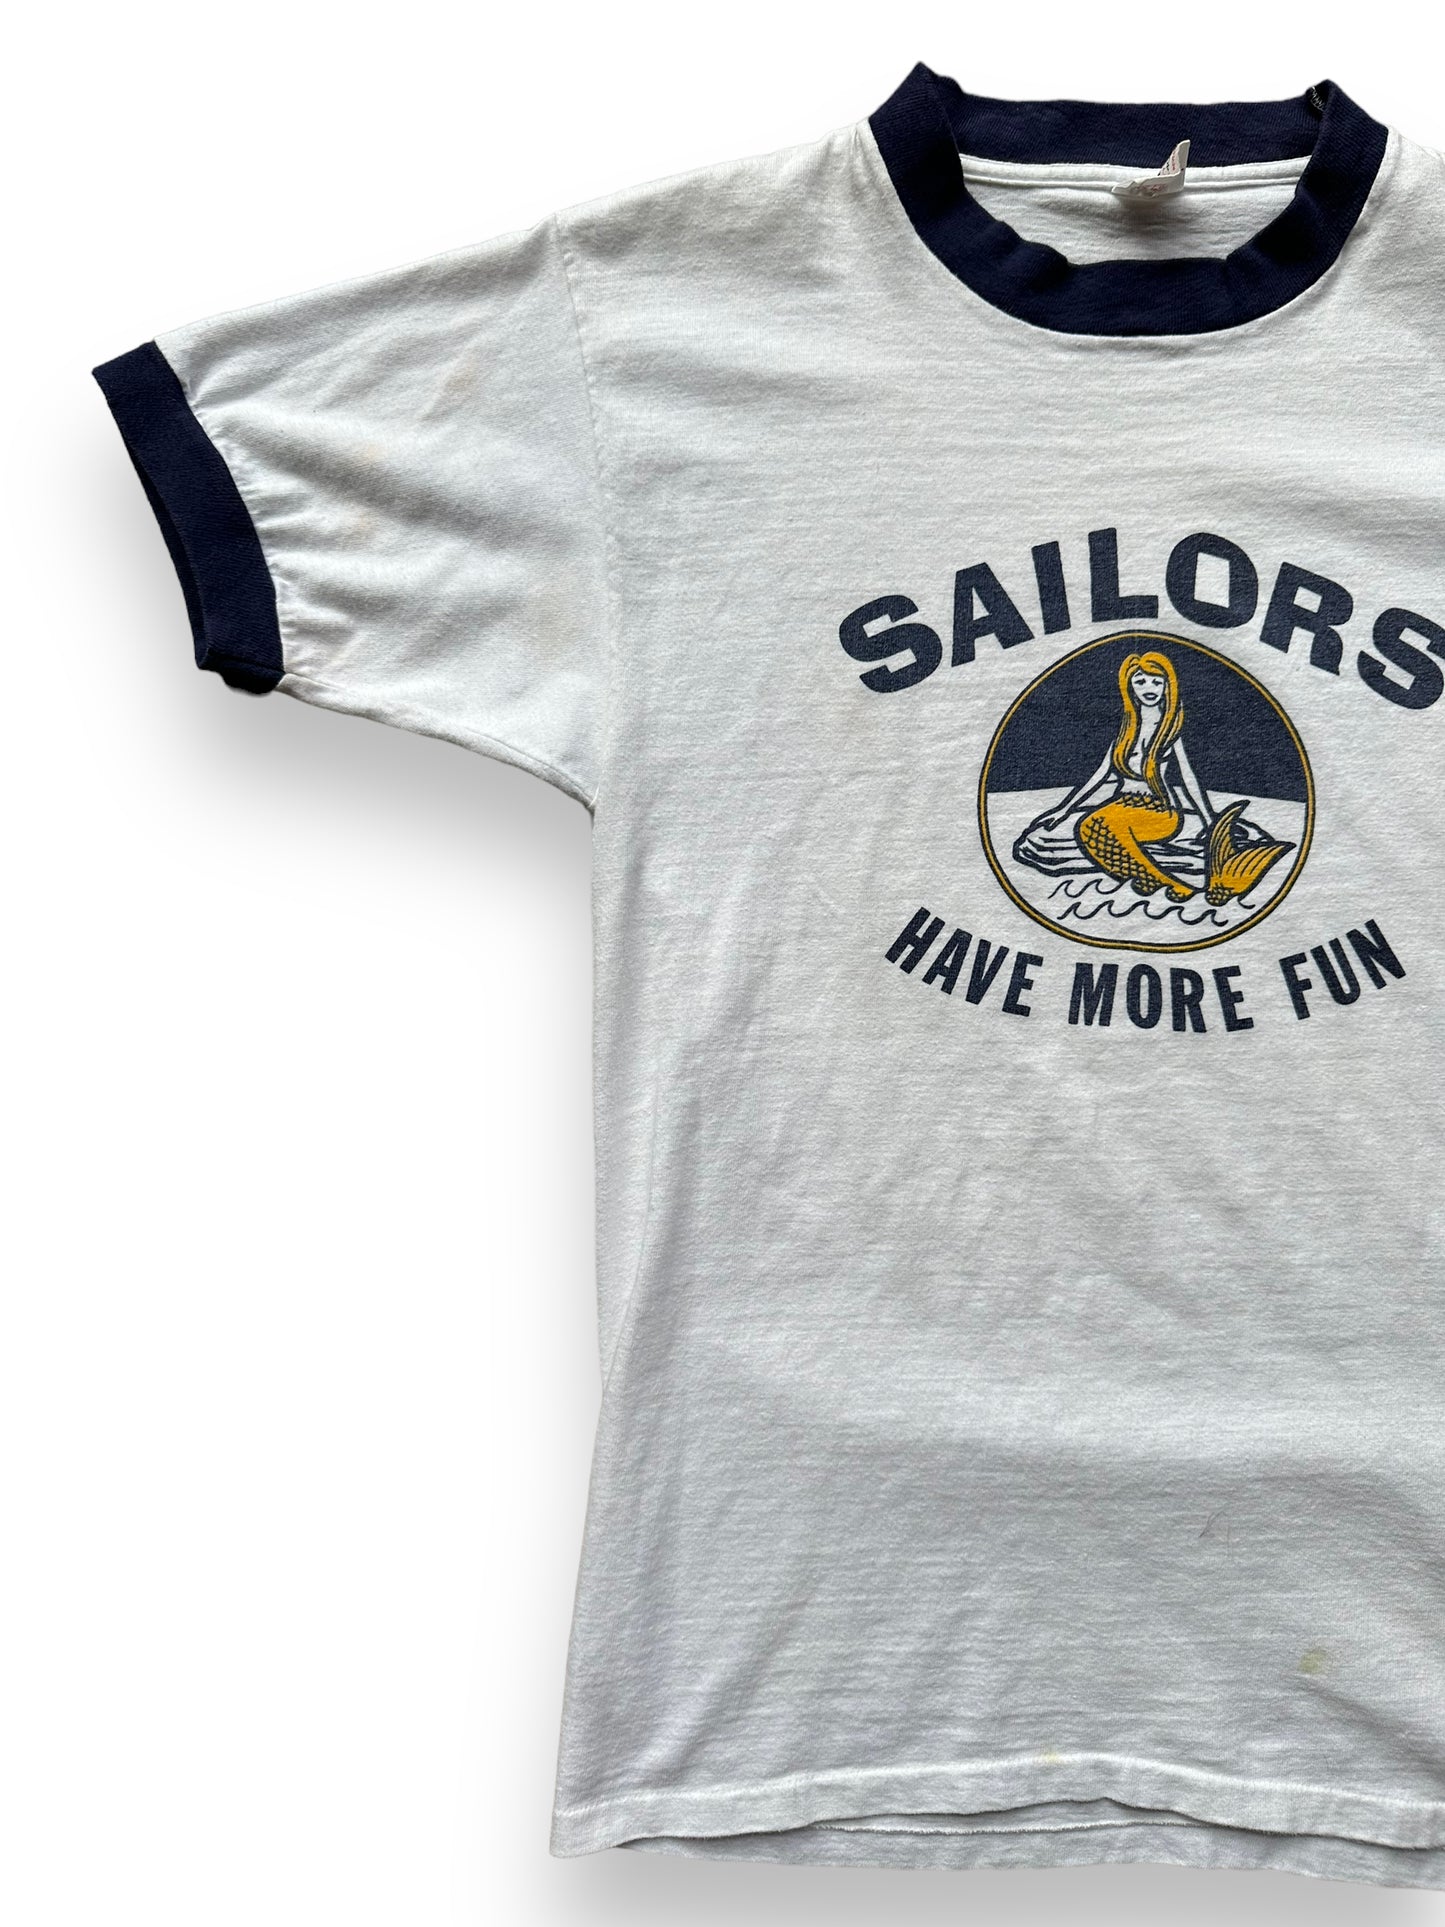 Front Right View of Vintage Sailors Have More Fun Ringer Tee SZ M | Vintage T-Shirts Seattle | Barn Owl Vintage Tees Seattle